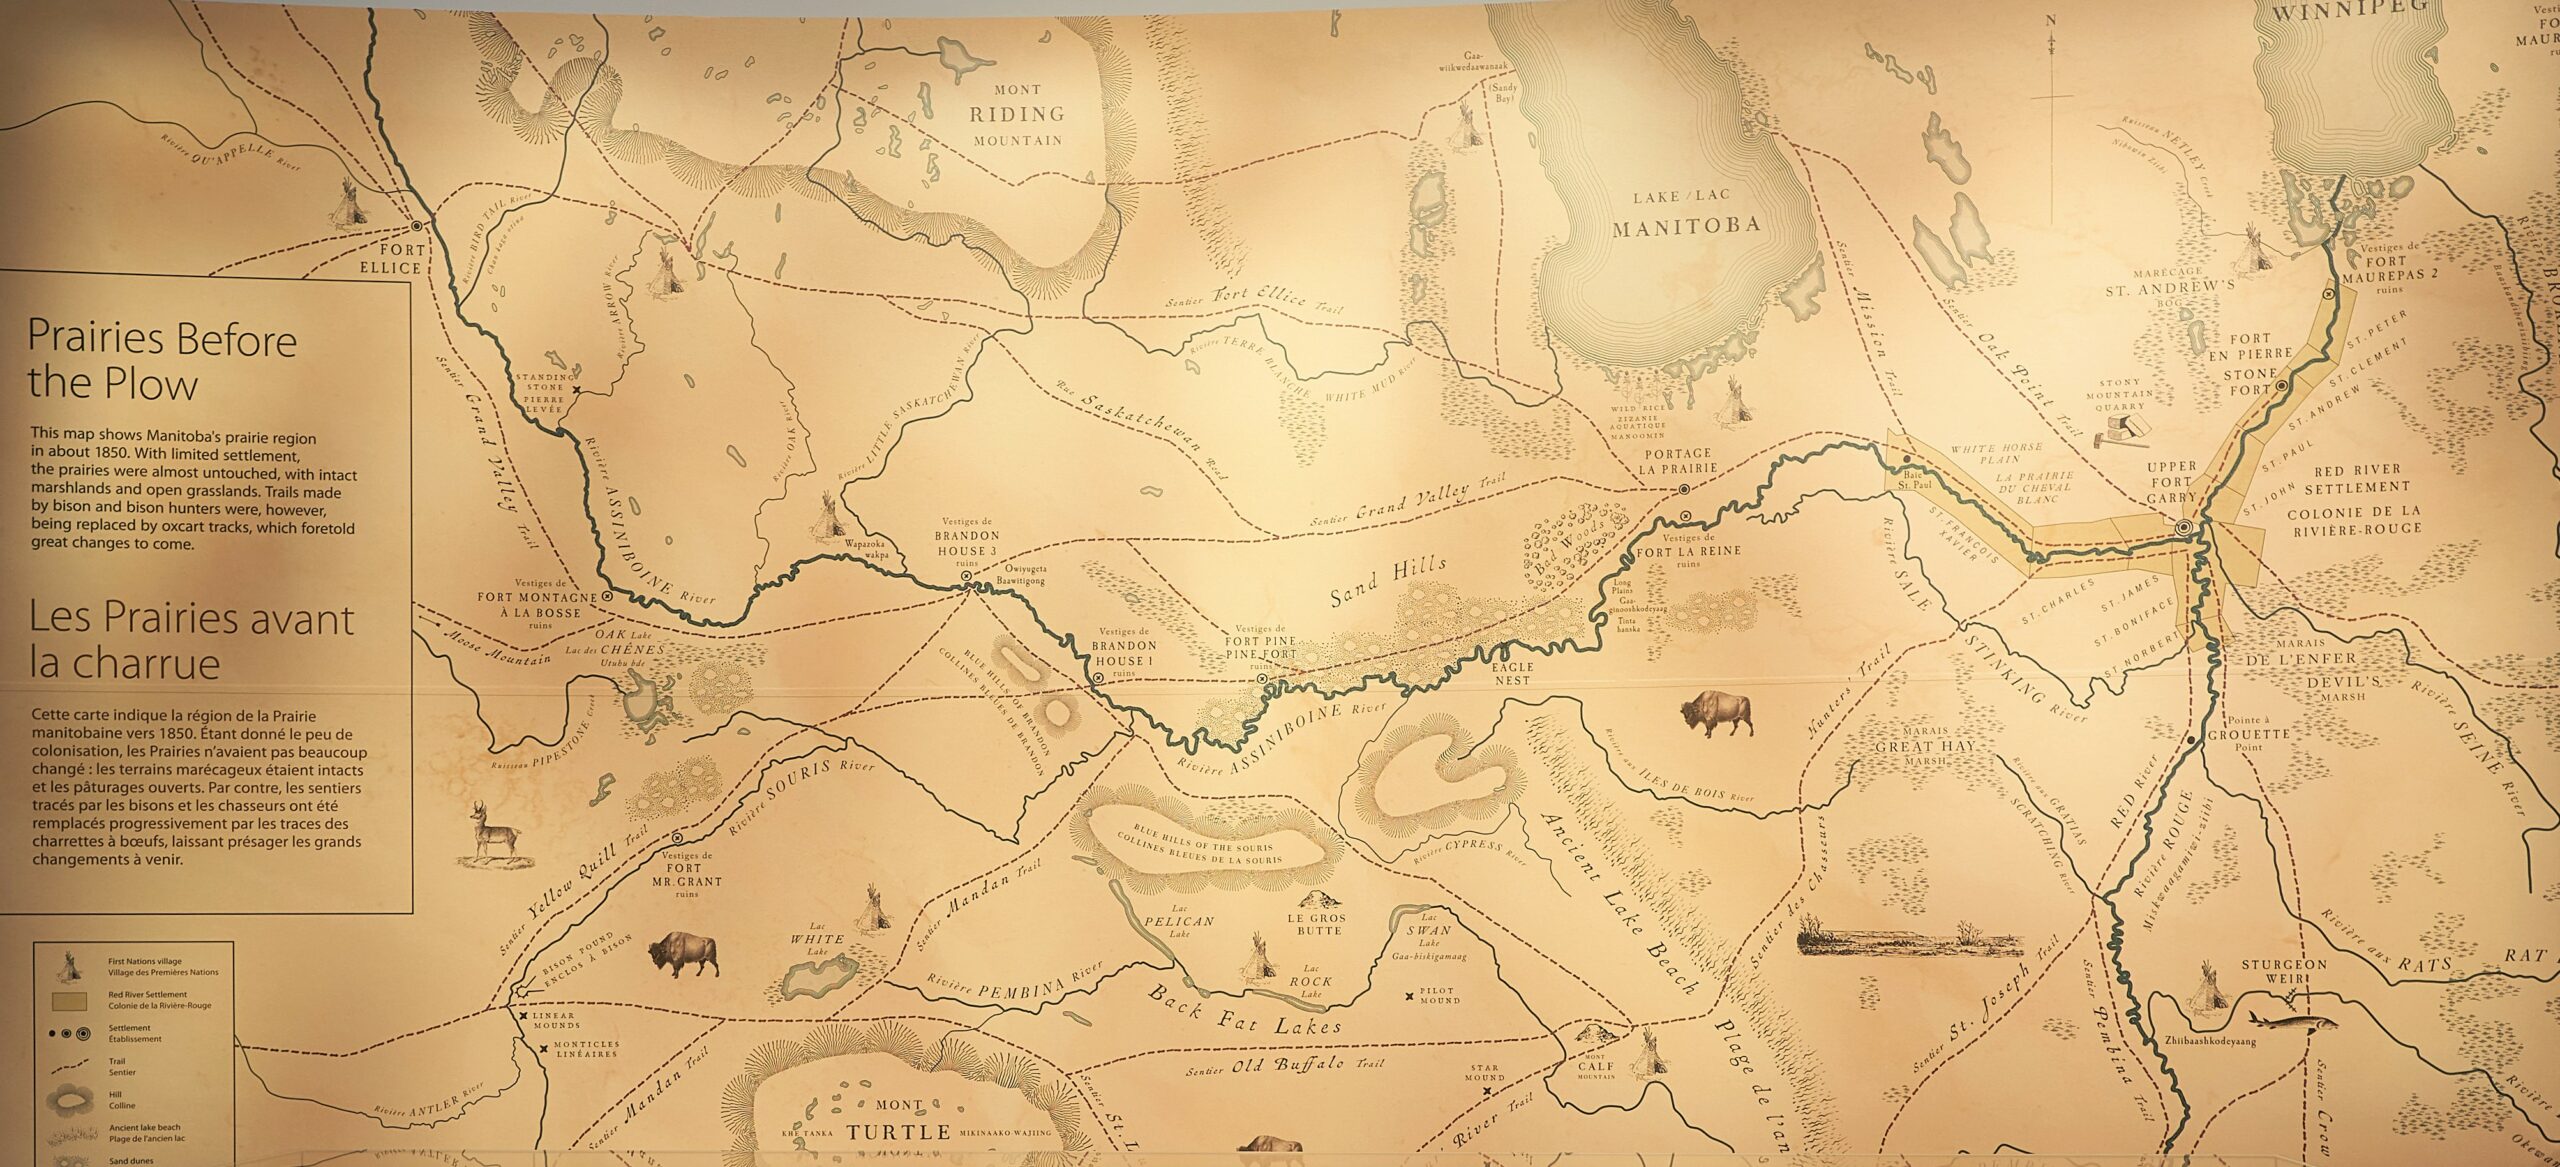 A close-up on an illustrated map of Manitoba, showing rivers and lakes.